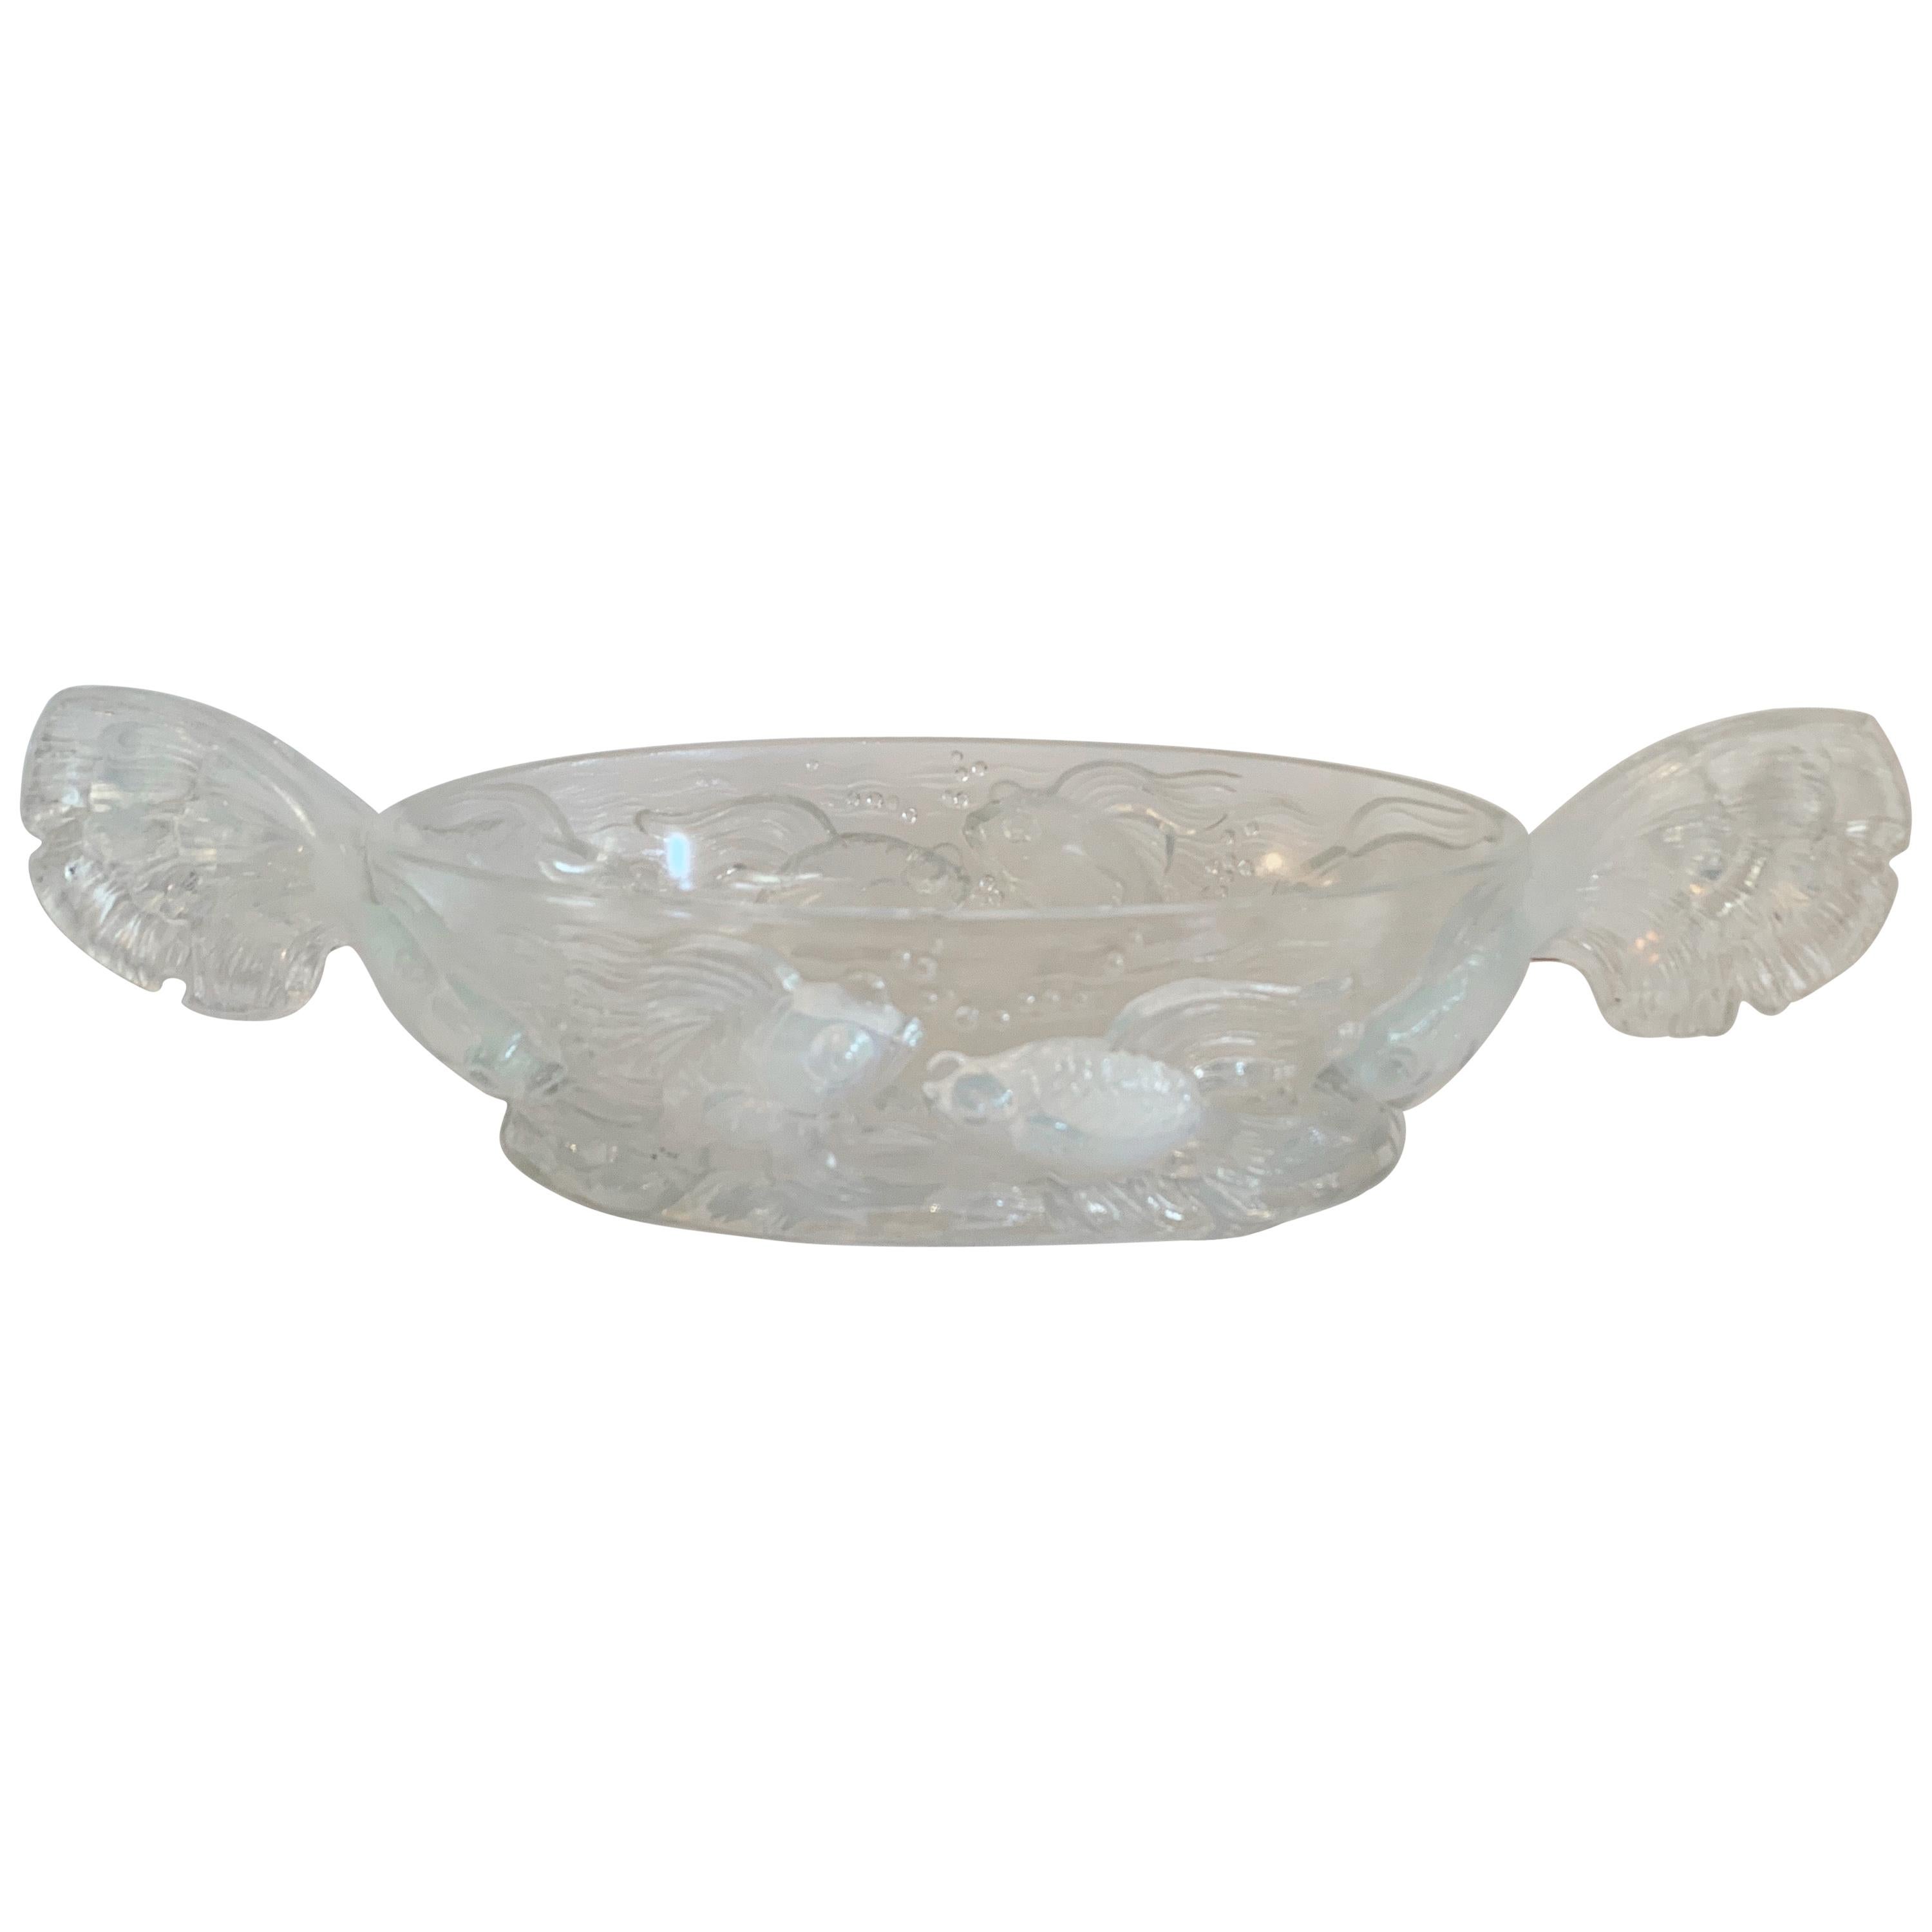 French Art Deco Verlys Opalescent Glass Poissons Koi Fish Oval Centerpiece Bowl